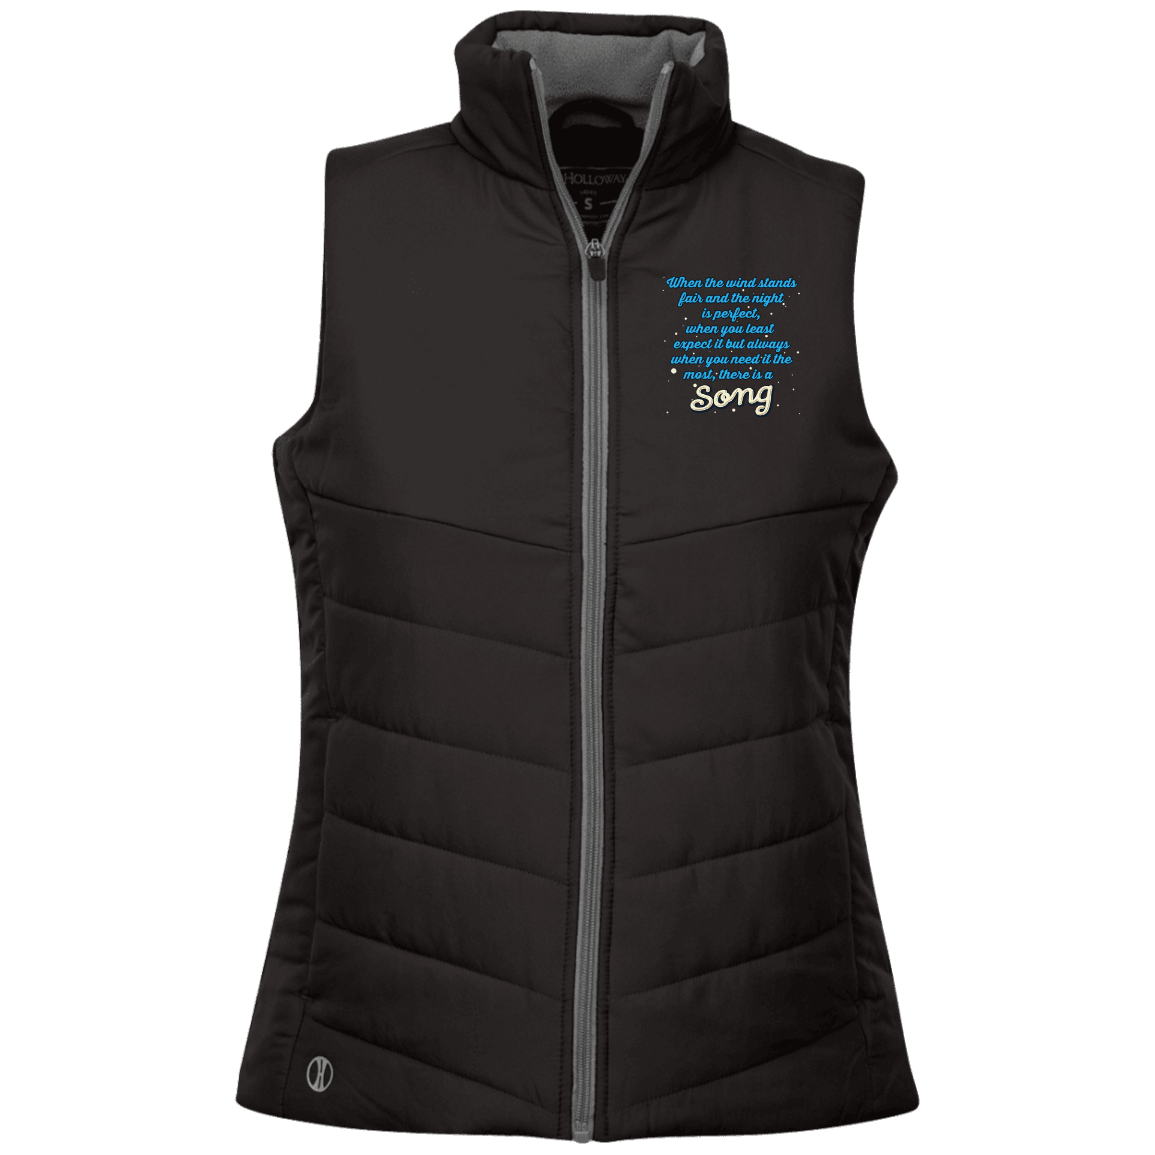 Designs by MyUtopia Shout Out:When you Need it the Most There Is A Song Embroidered Ladies' Quilted Vest,X-Small / Black,Jackets